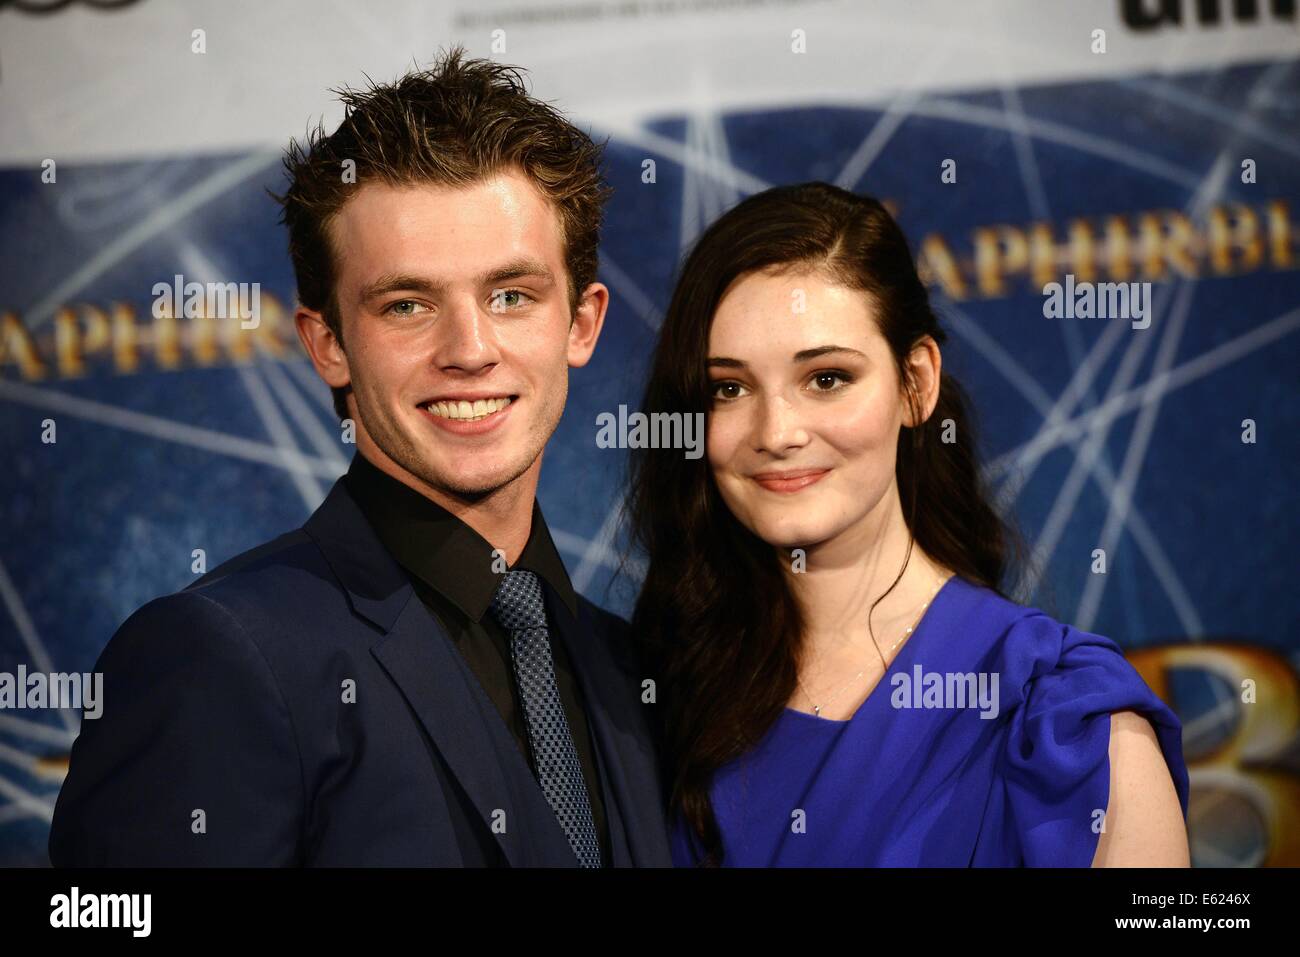 Cologne, Germany. 11th Aug, 2014. Actors Jannis Niewoehner and Maria Ehrich pose before the premiere of the film 'Sapphire Blue' in Cologne, Germany, 11 August 2014. The film will come to German cinemas on 14 August 2014. Photo: Henning Kaiser/dpa/Alamy Live News Stock Photo